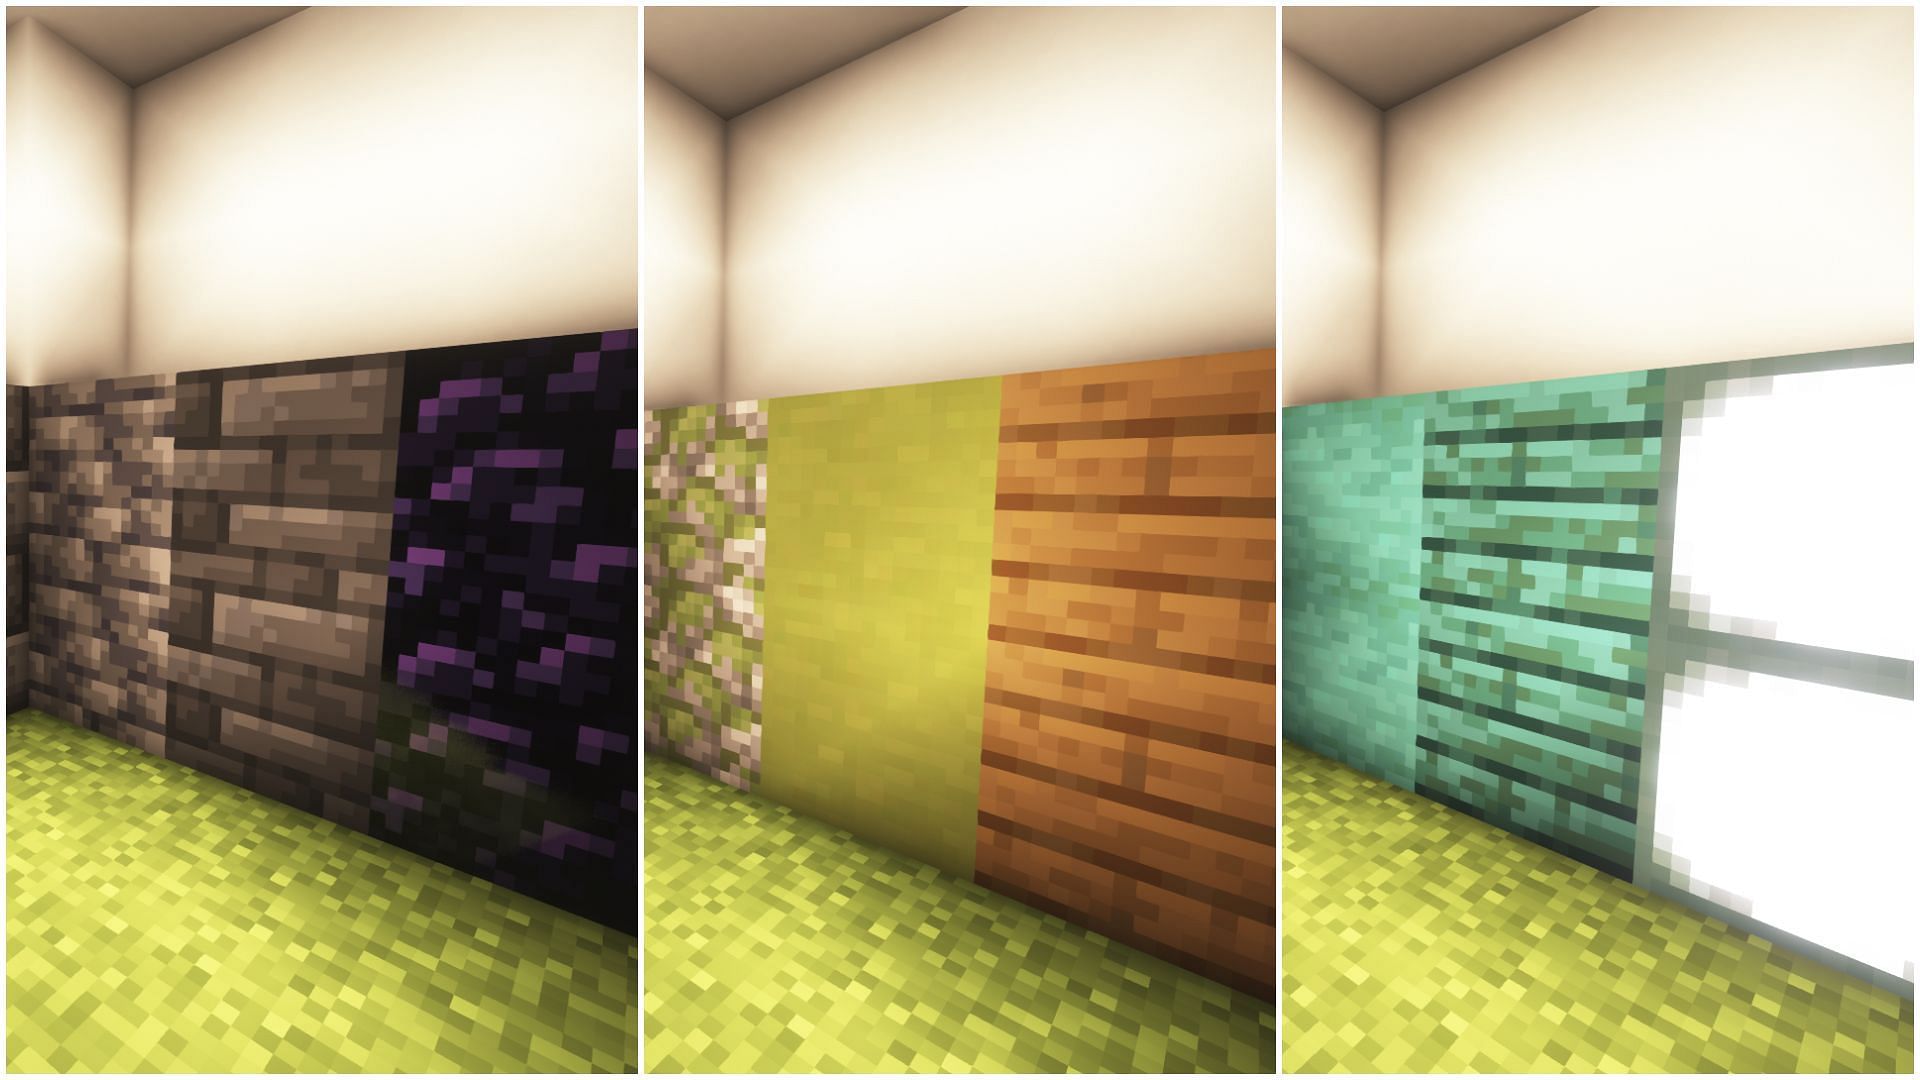 There are many different block color palette that players can use to build in Minecraft (Image via Sportskeeda)